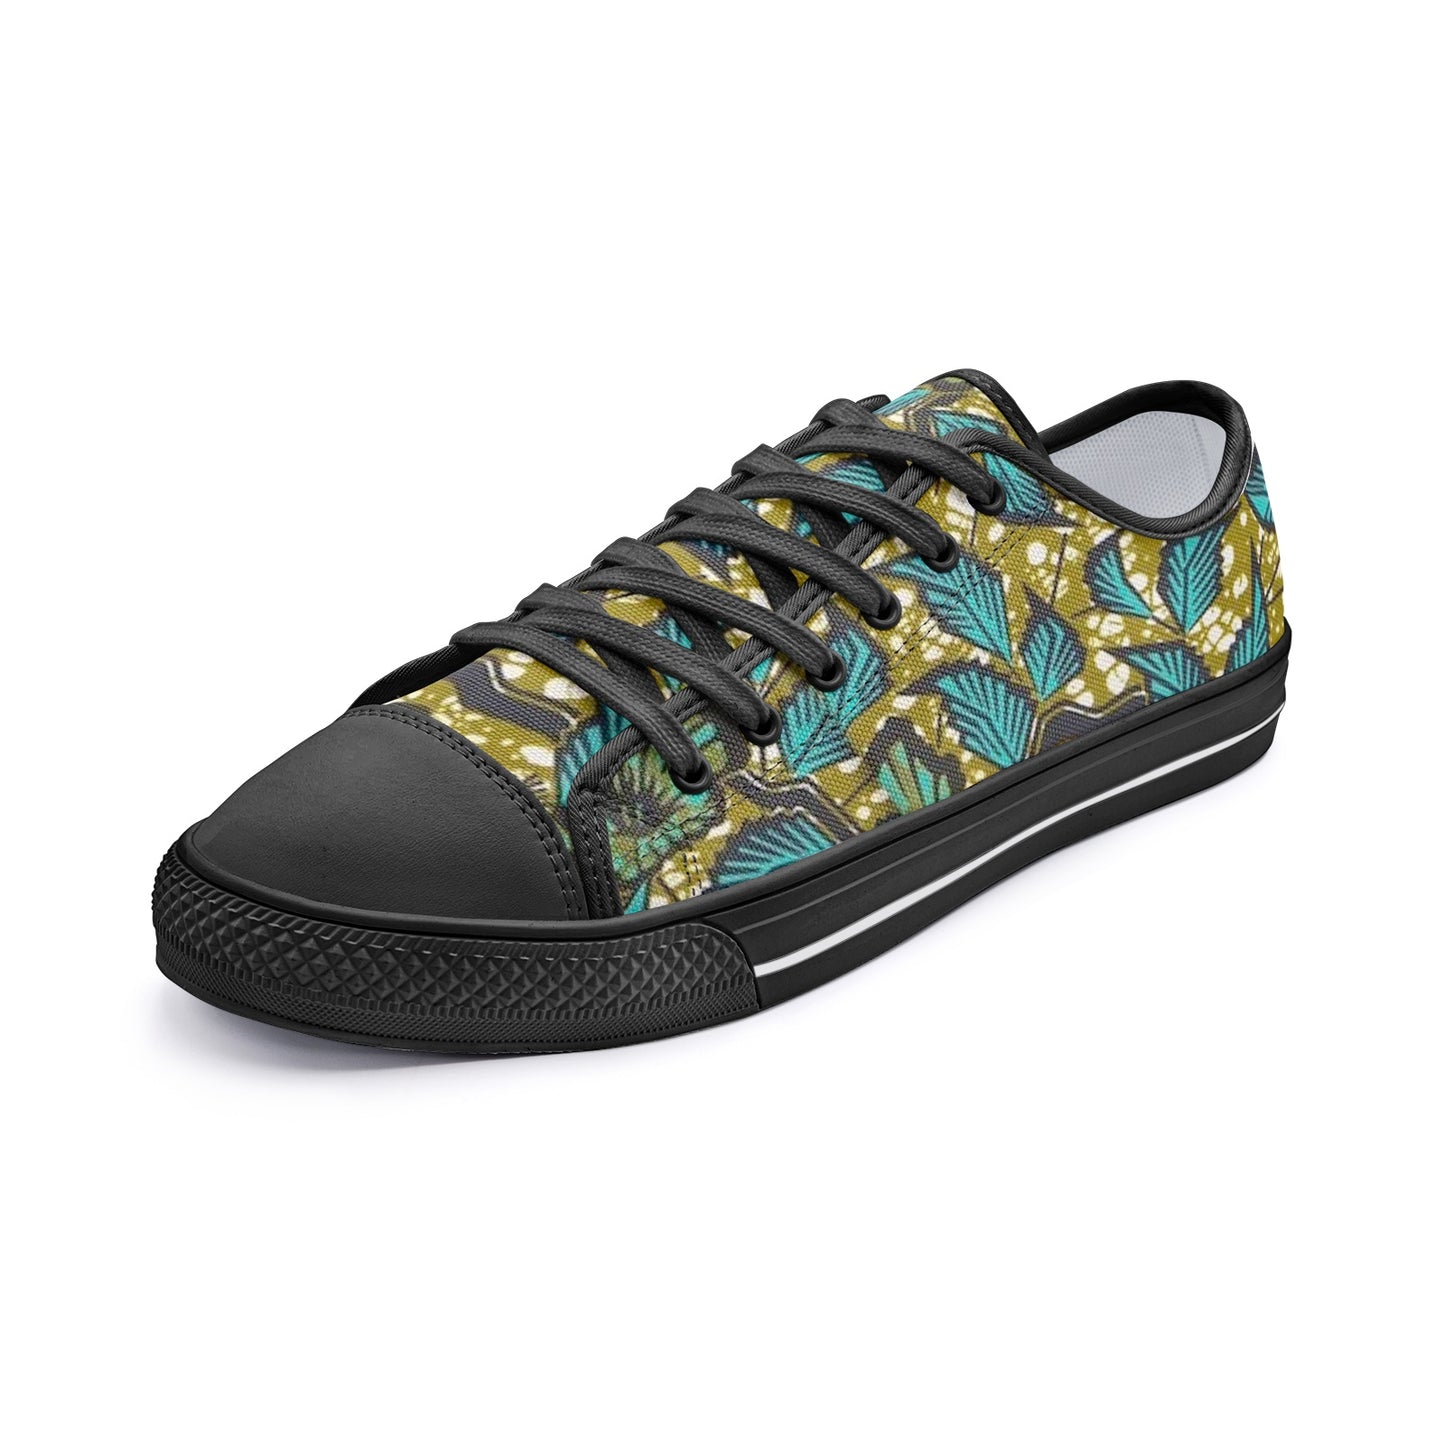 FZ Unisex Low Top Canvas Shoes Printy6